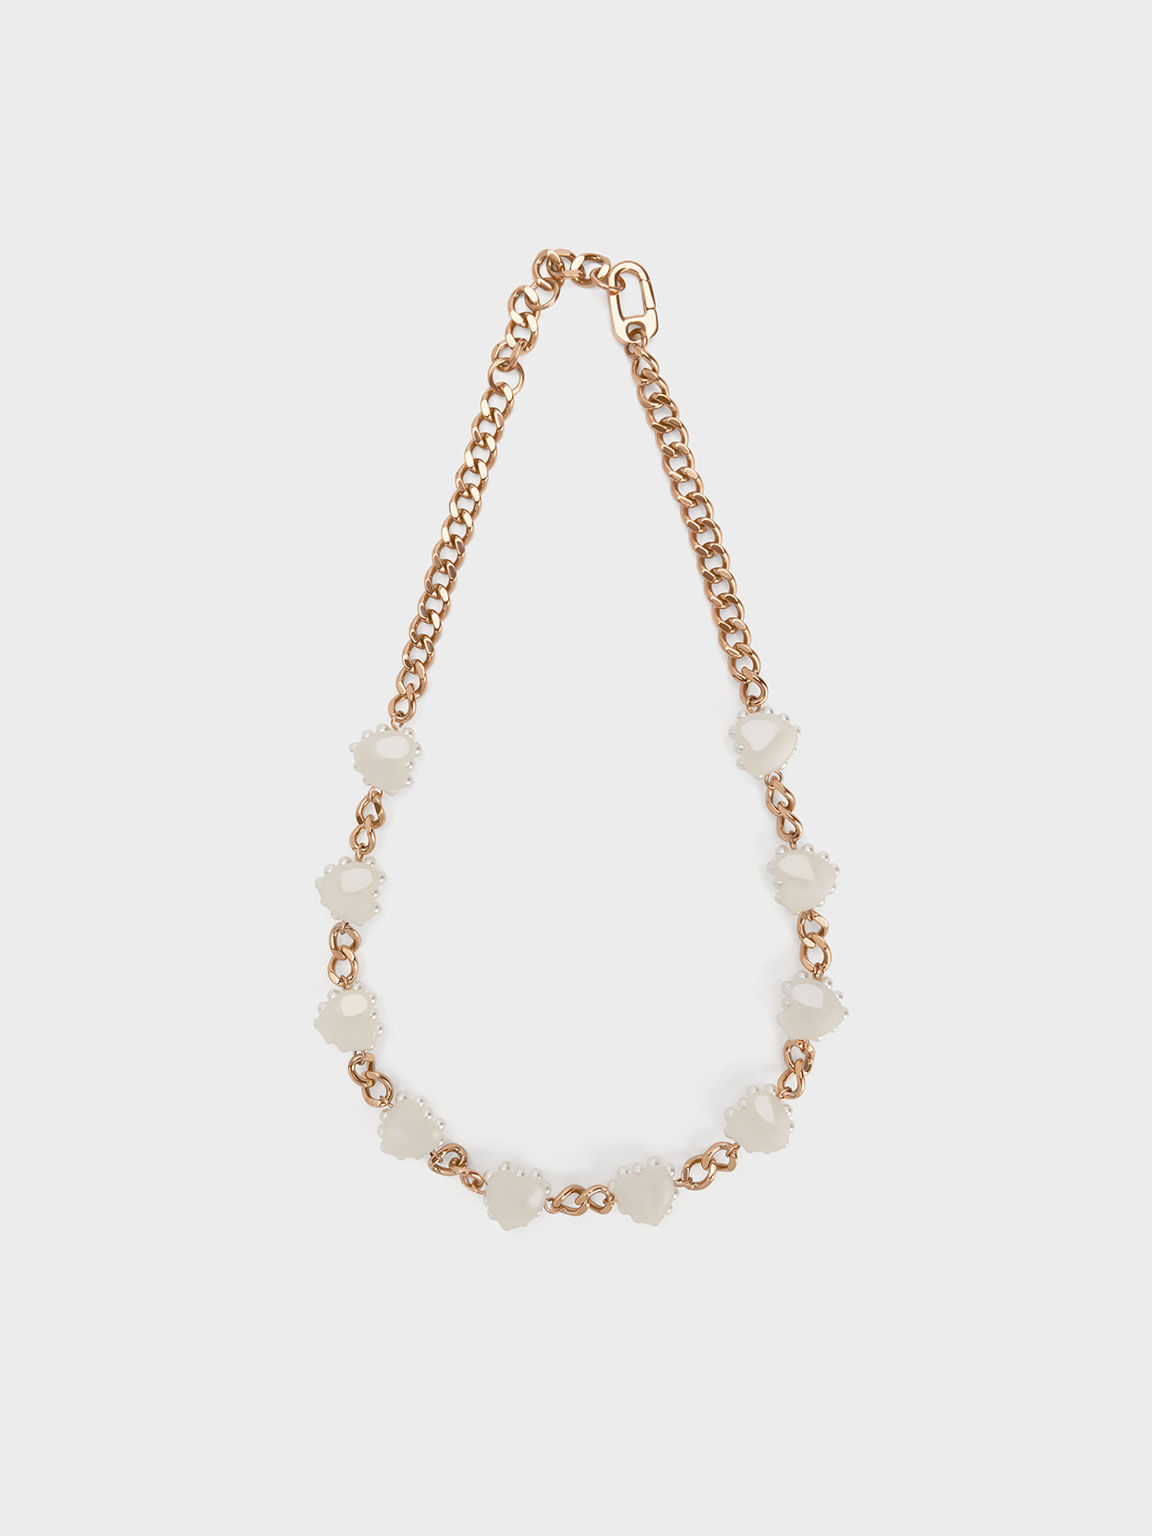 Gold Heart Motif Choker - Necklace US & KEITH CHARLES